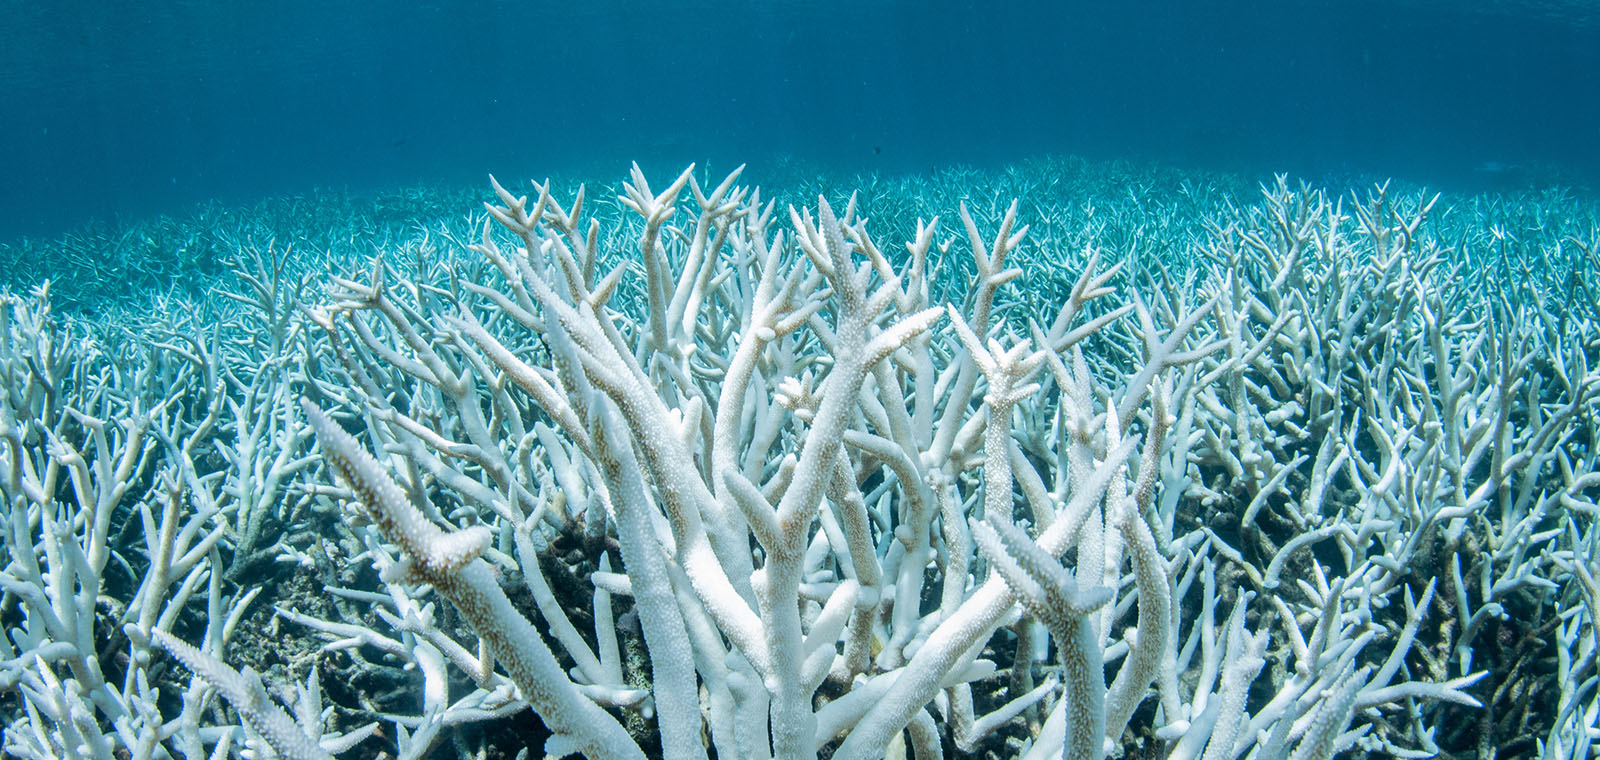 An underwater forest of ghost-white bleached coral reefs reveals the growing impact of global climate change on our oceans.